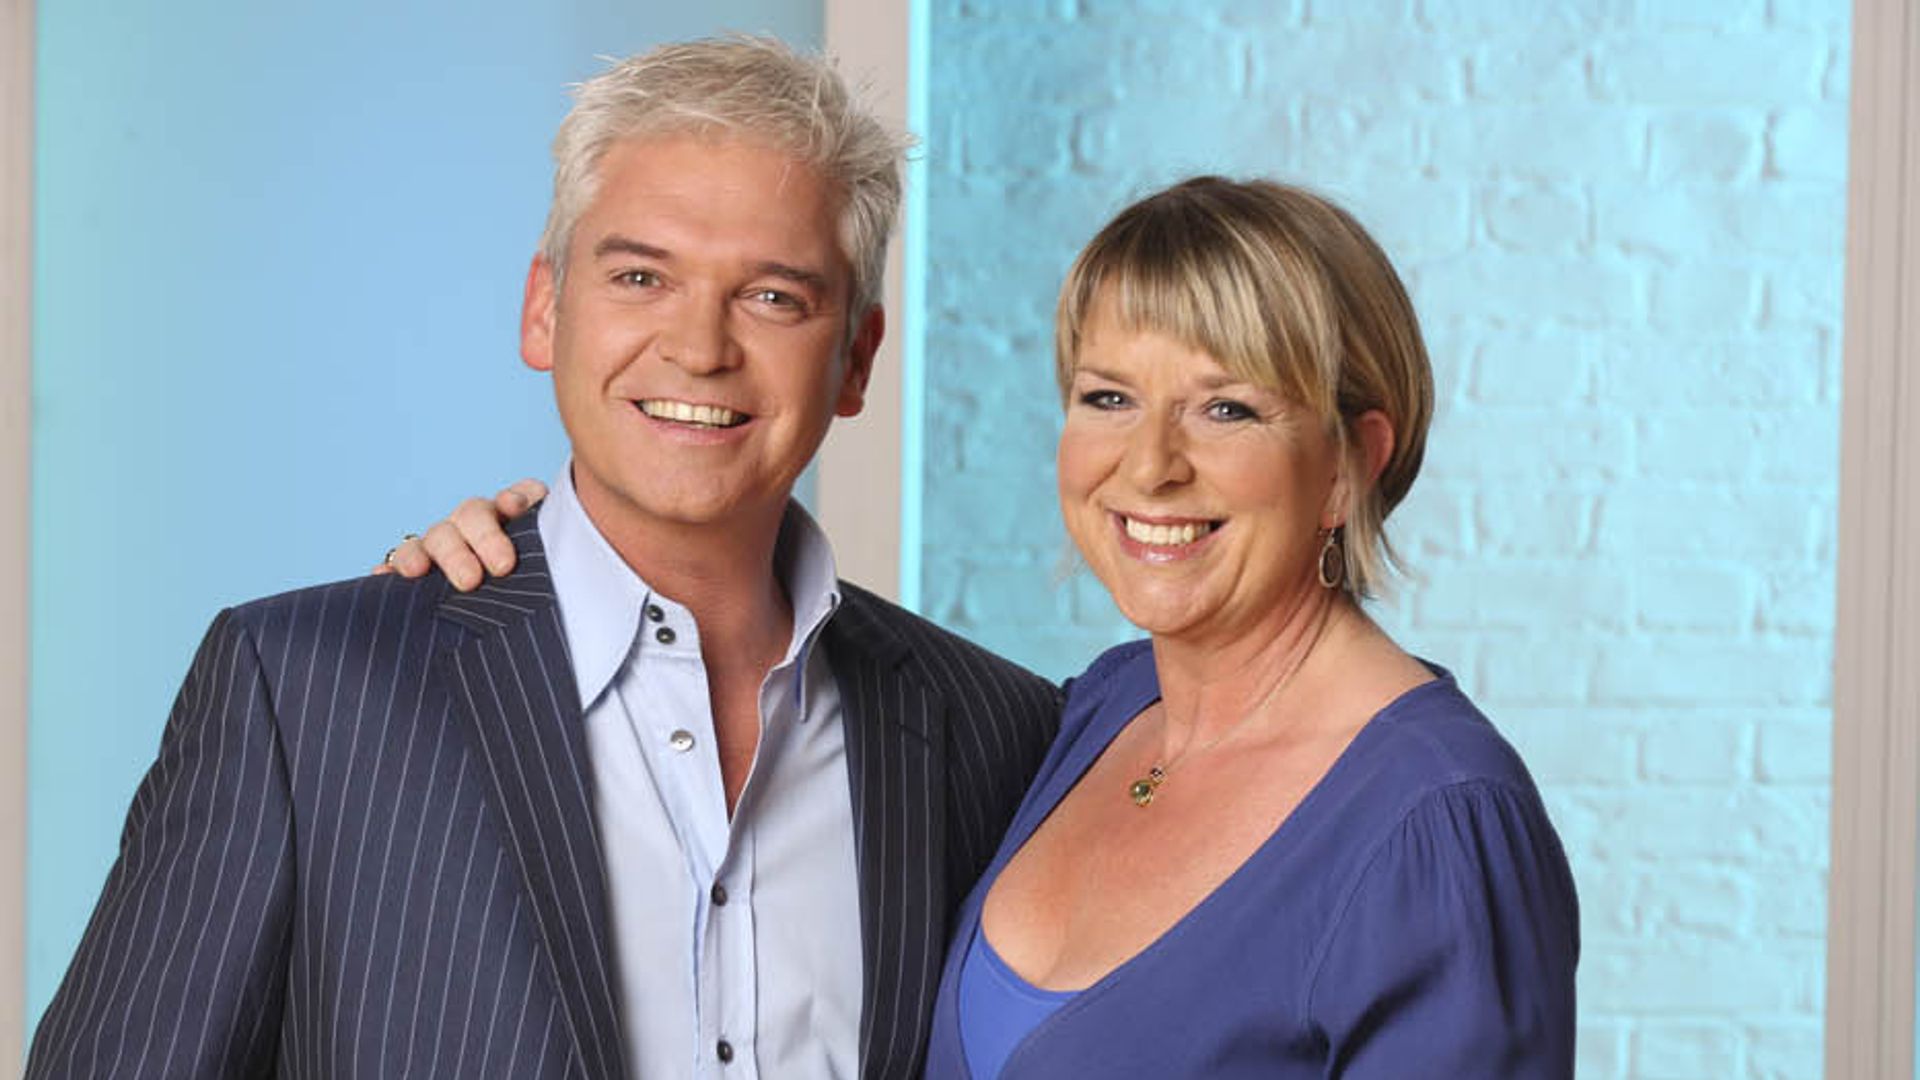 Phillip Schofield and Fern Britton on 'This Morning' TV Programme - 2008